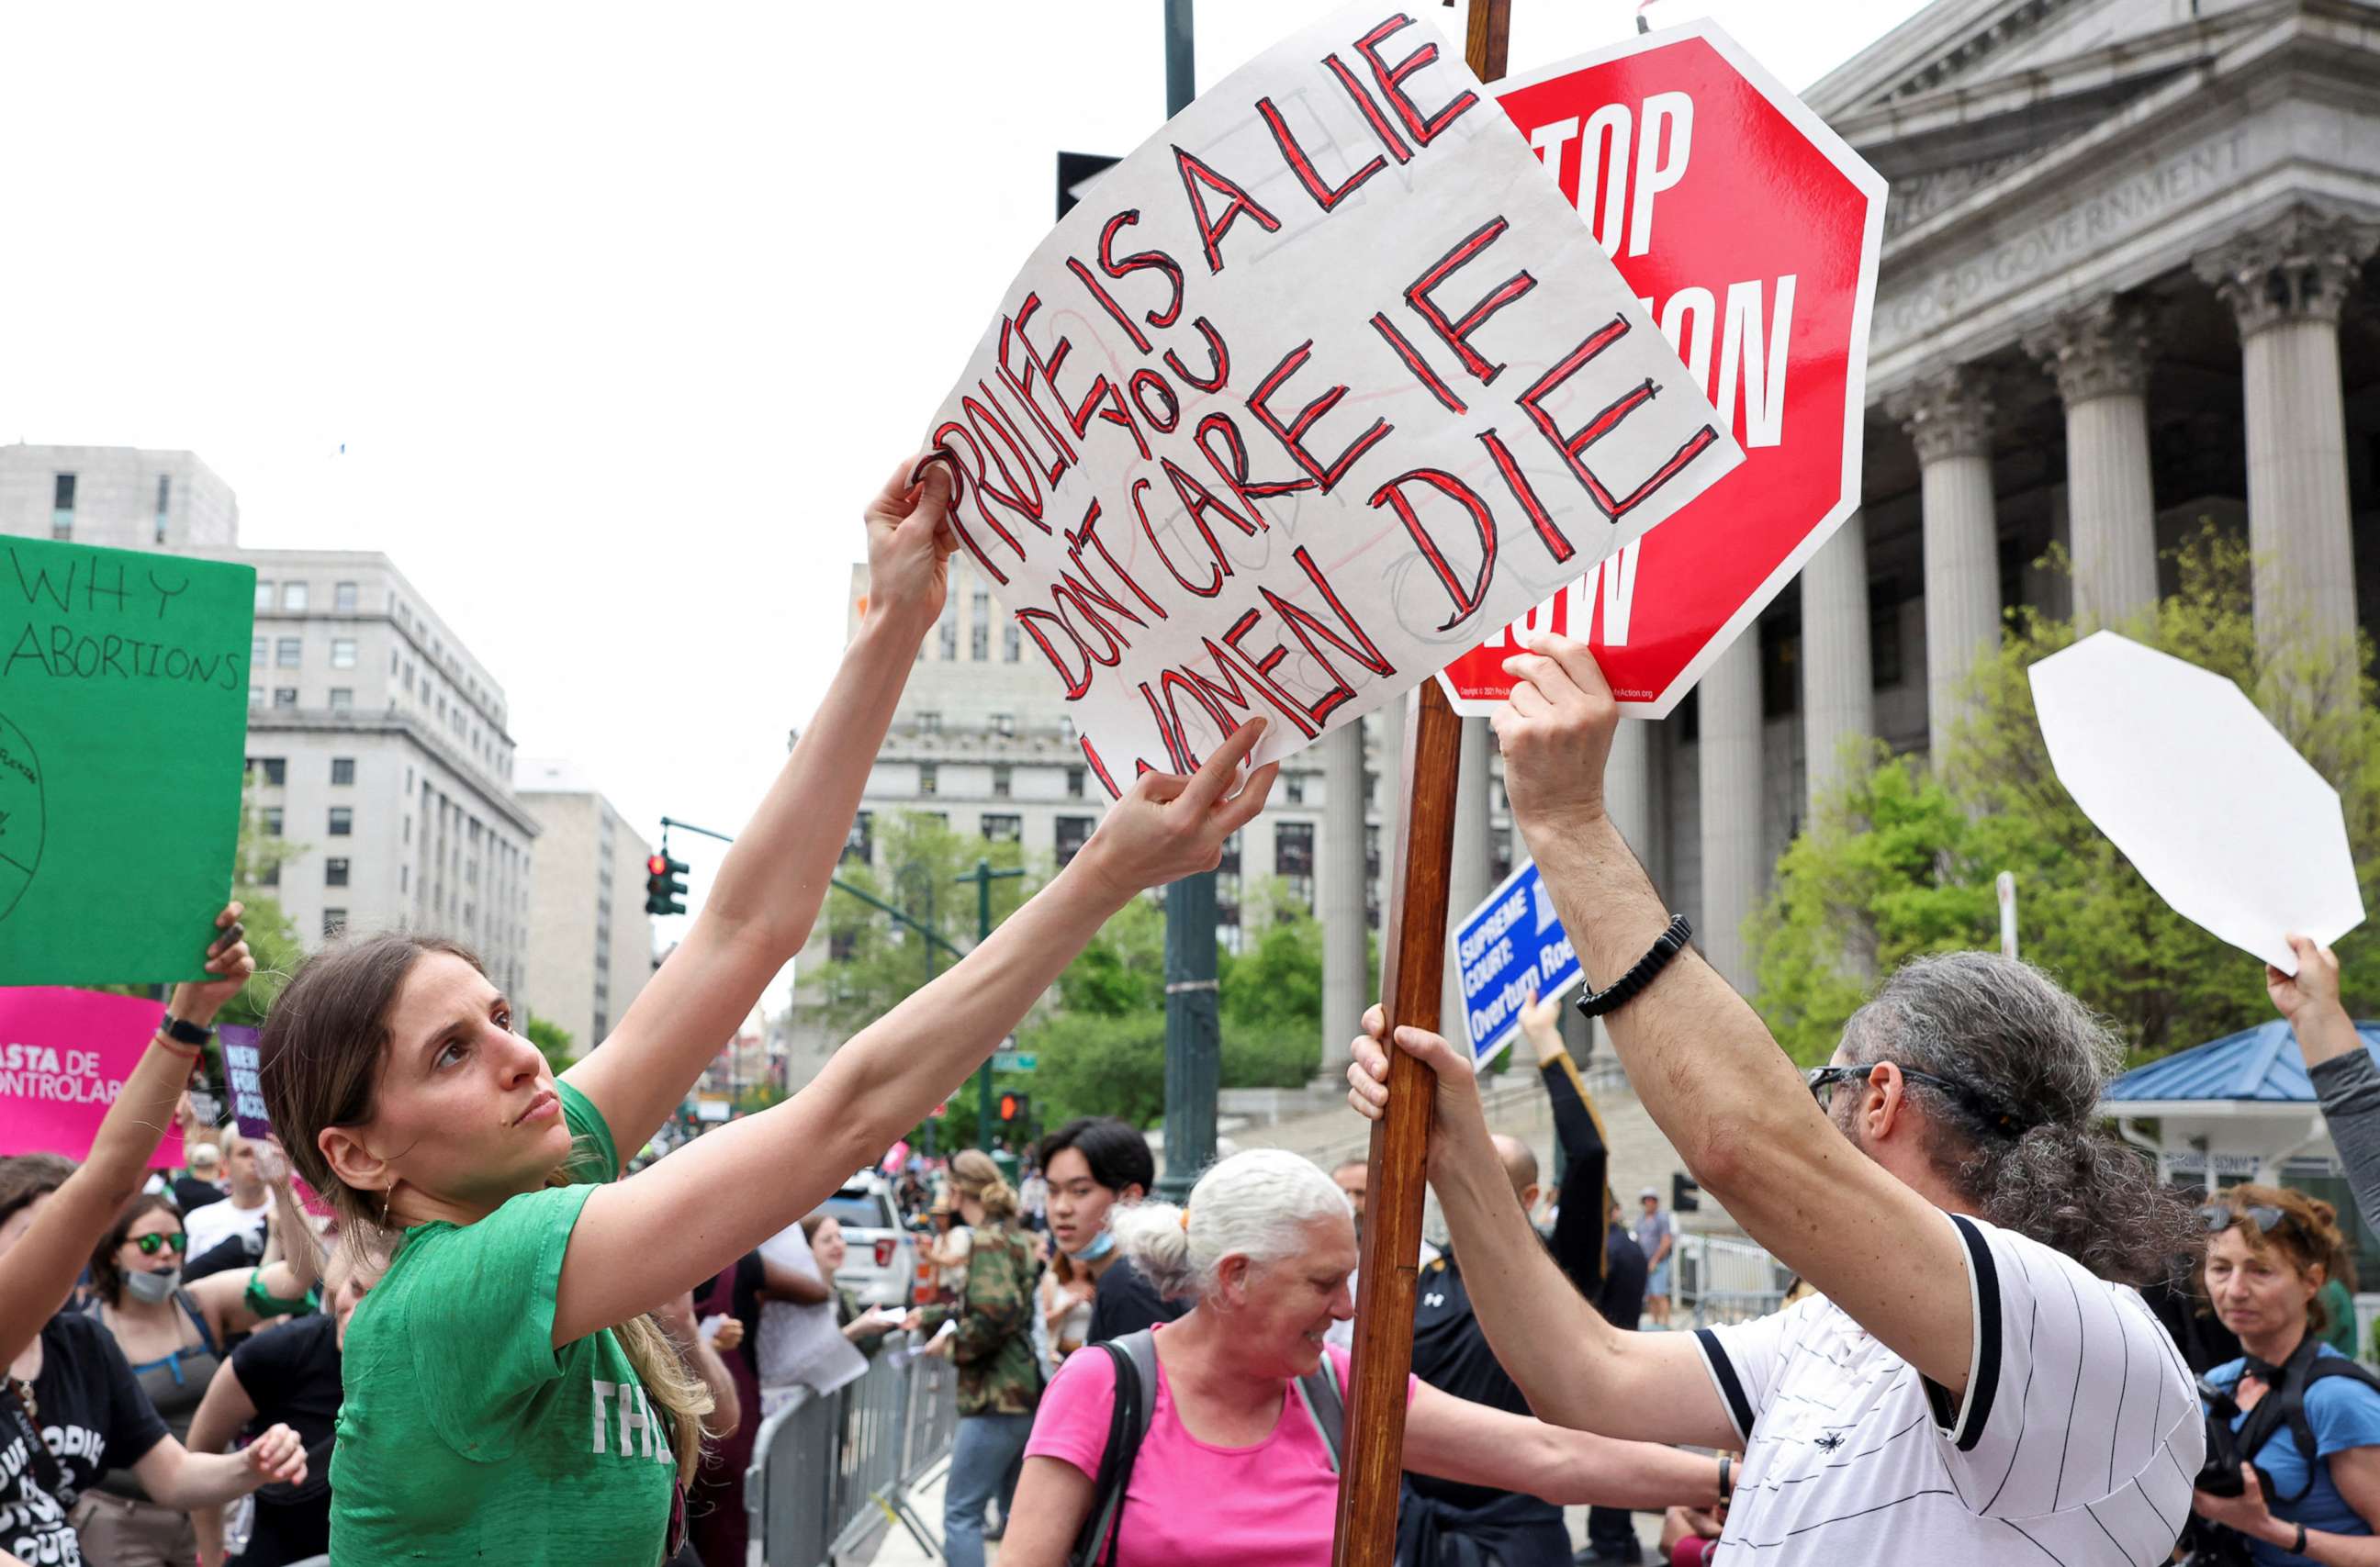 PHOTO:  An abortion rights protester holds a placard in front of an anti-abortion protester during demonstrations following the leaked Supreme Court opinion suggesting the possibility of overturning Roe v. Wade, in New York, May 14, 2022.